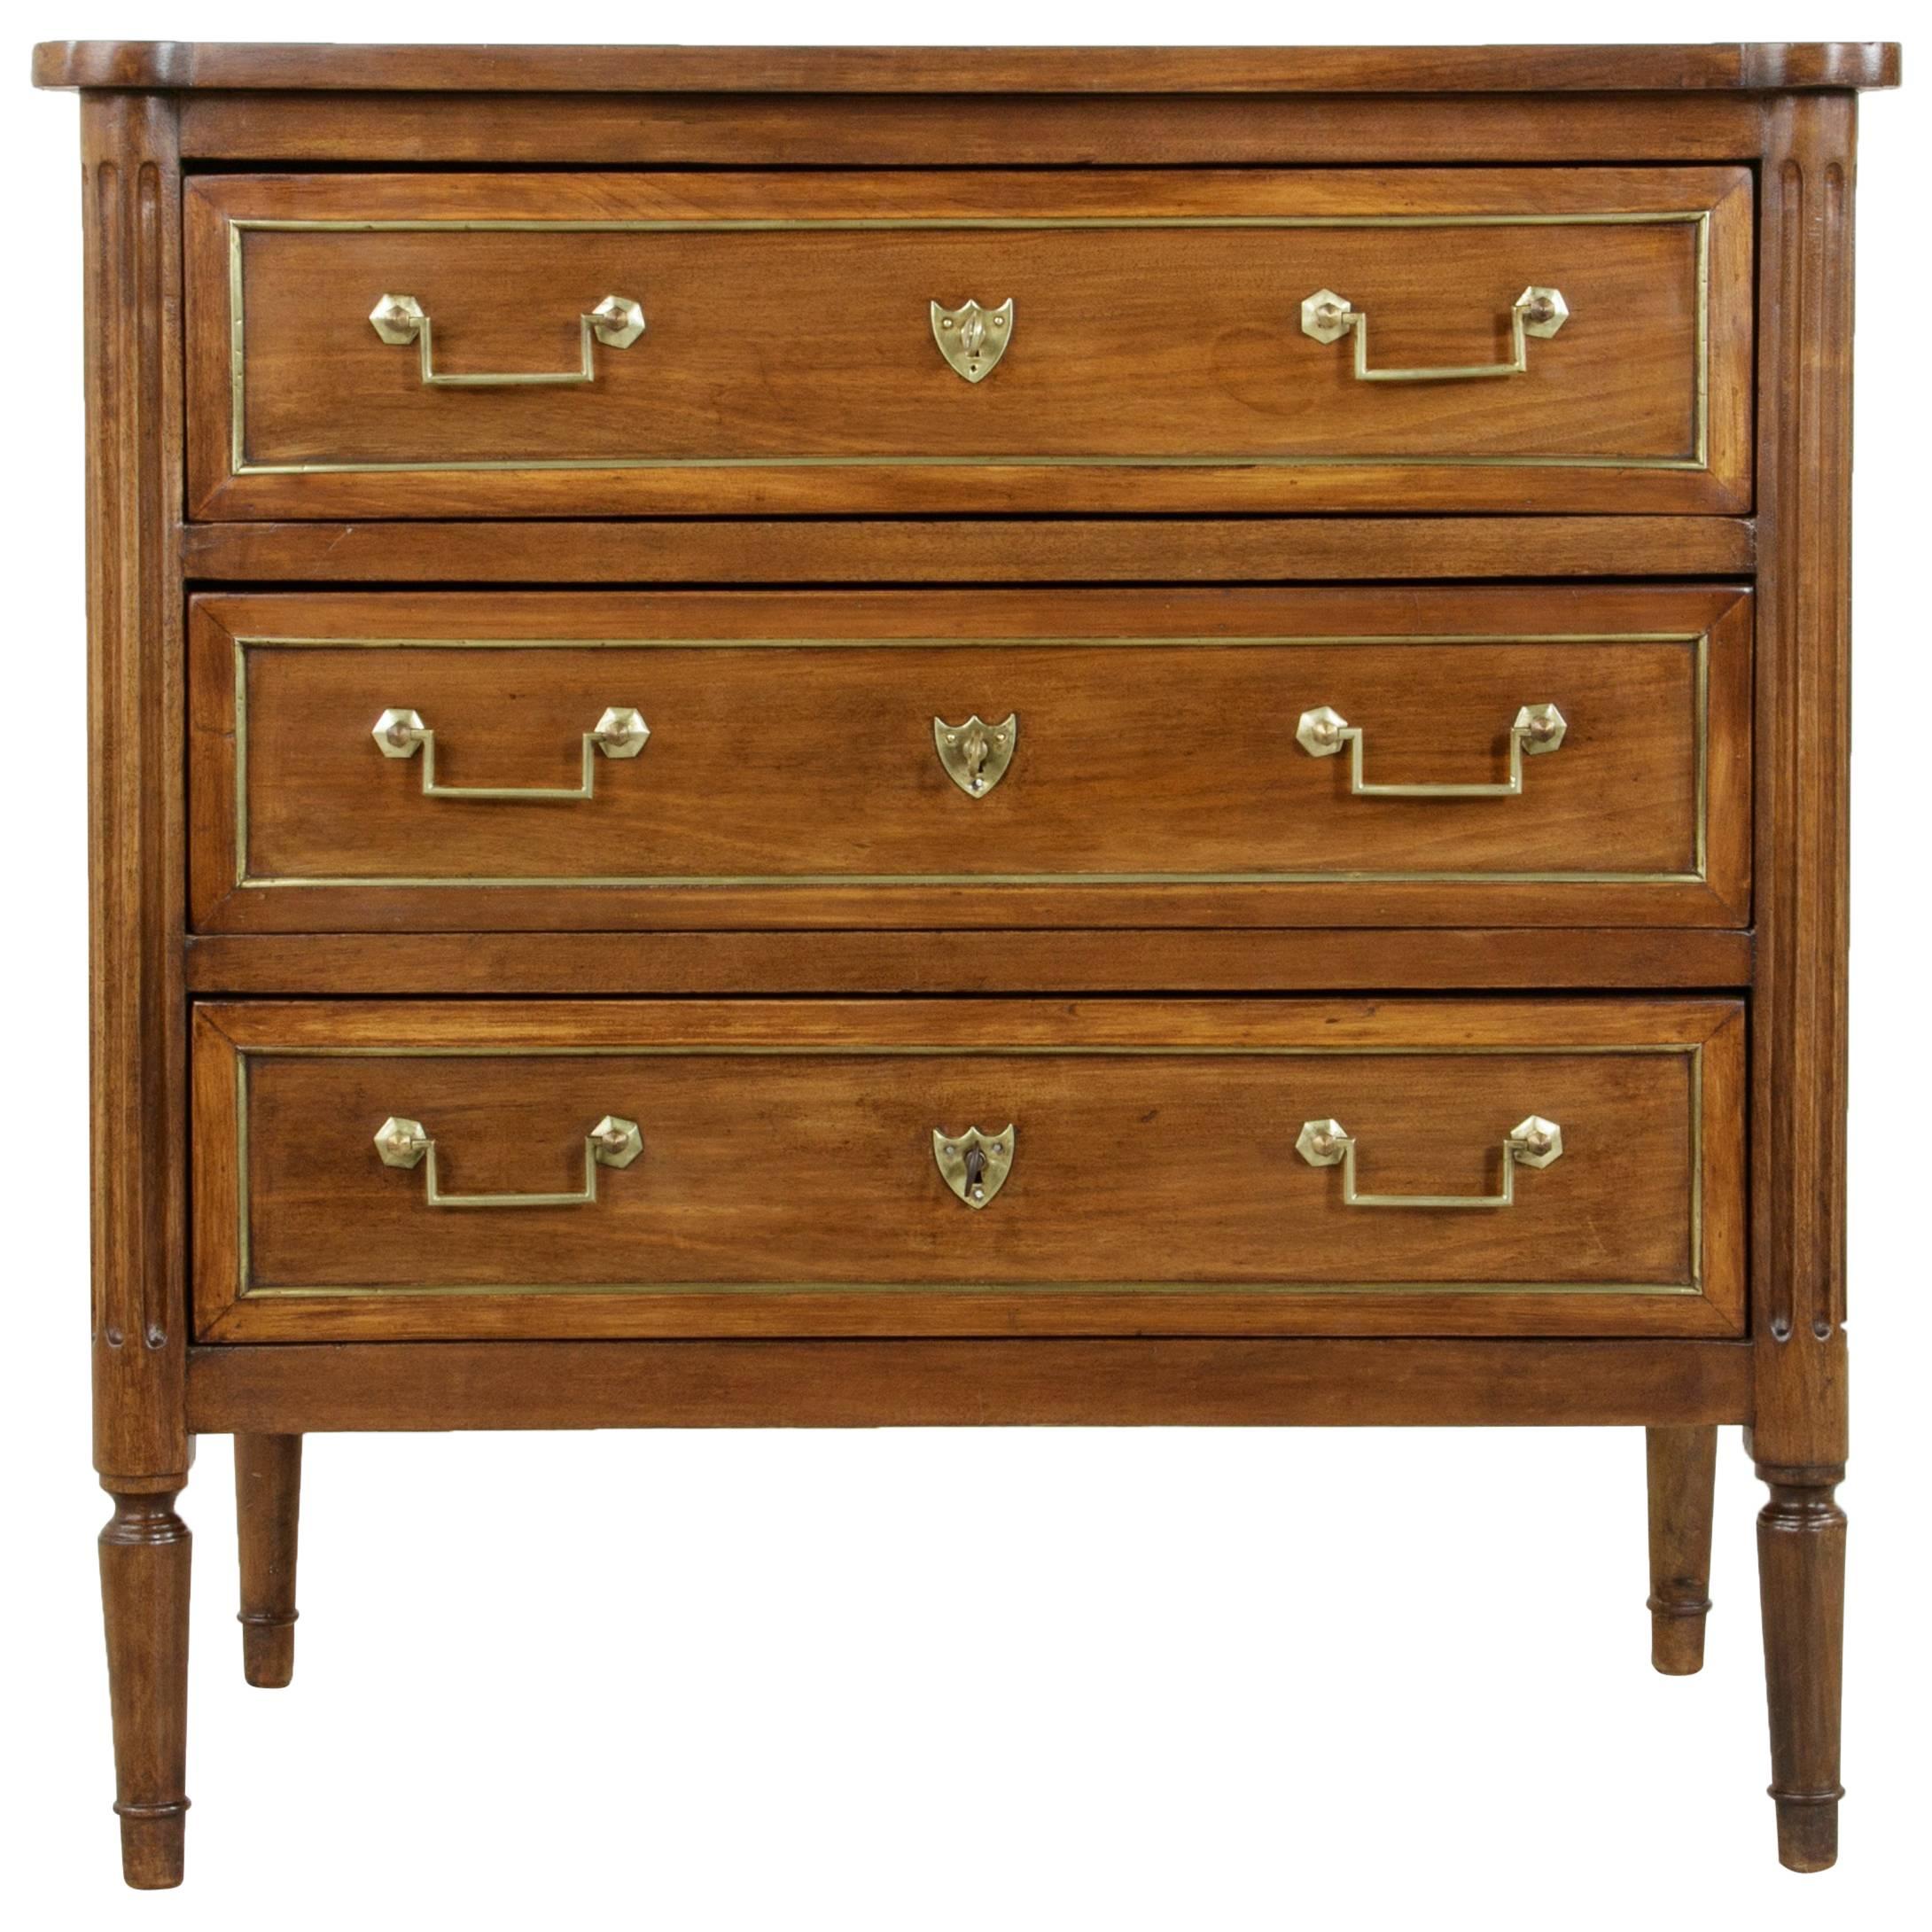 Late 18th Century French Louis XVI Period Walnut Commode, Chest, or Nightstand